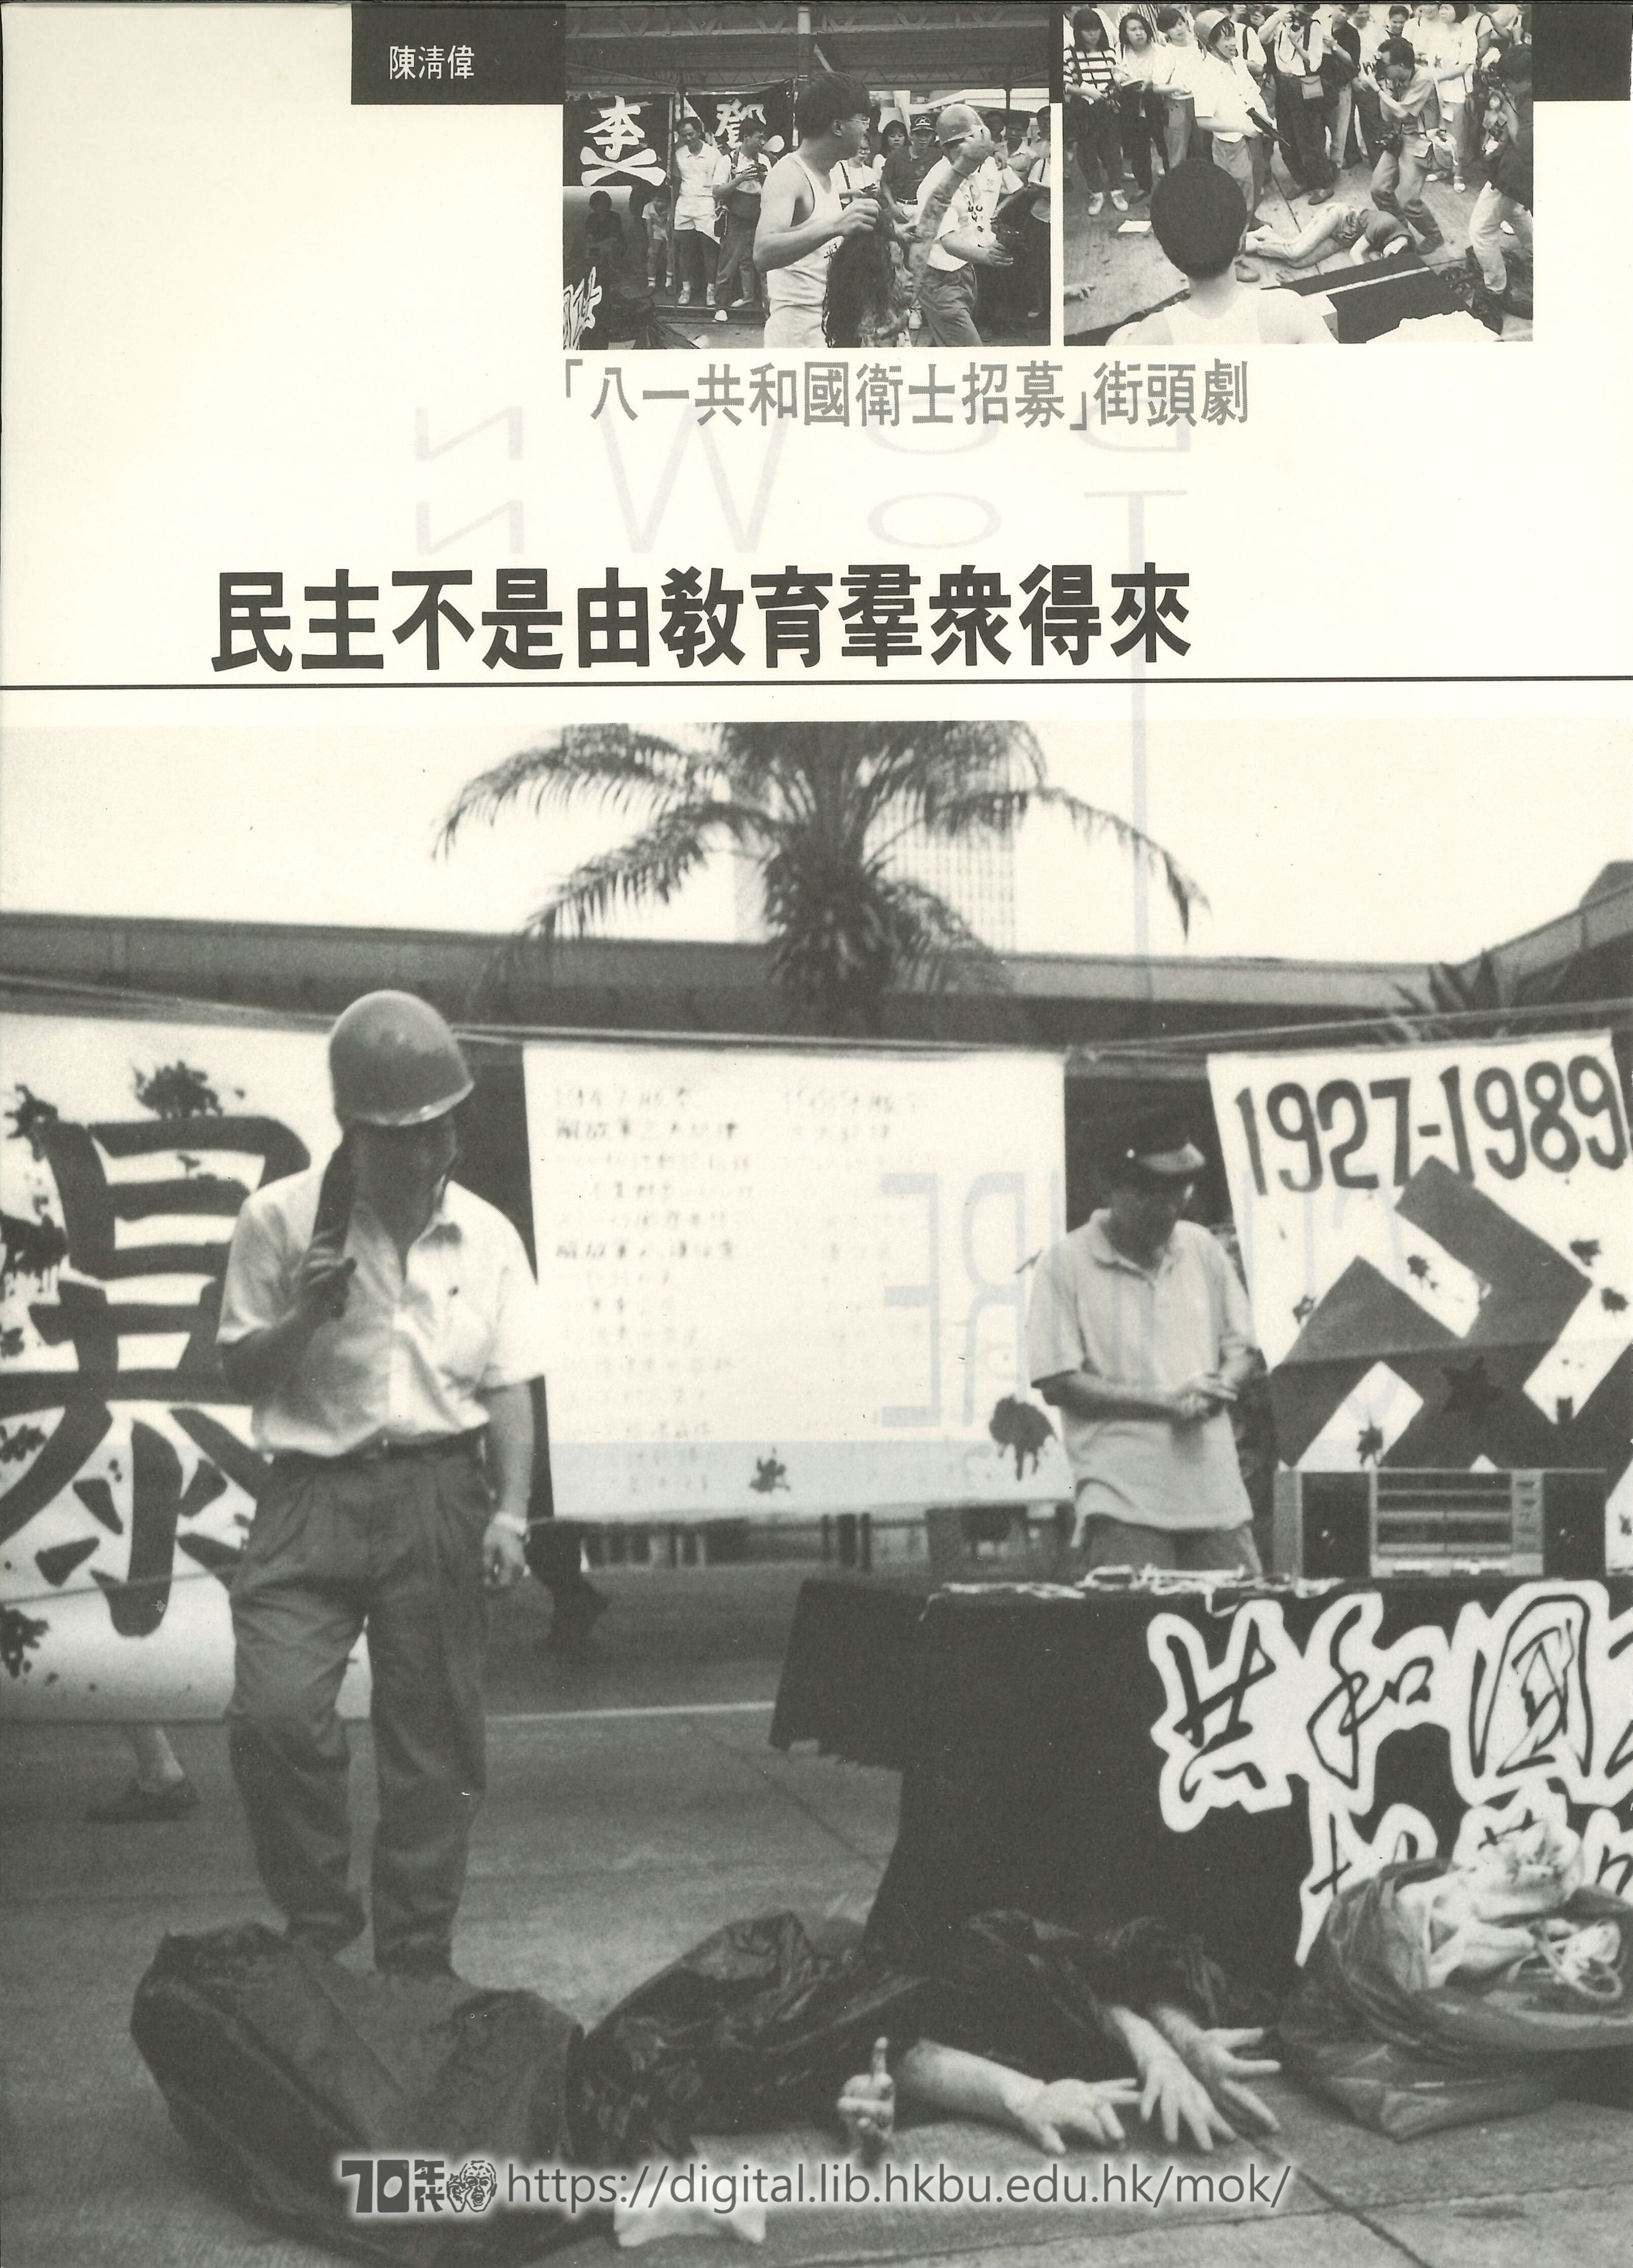   August 1 Republic warriors recruitment - democracy cannot be attained by mass education 陳清偉 